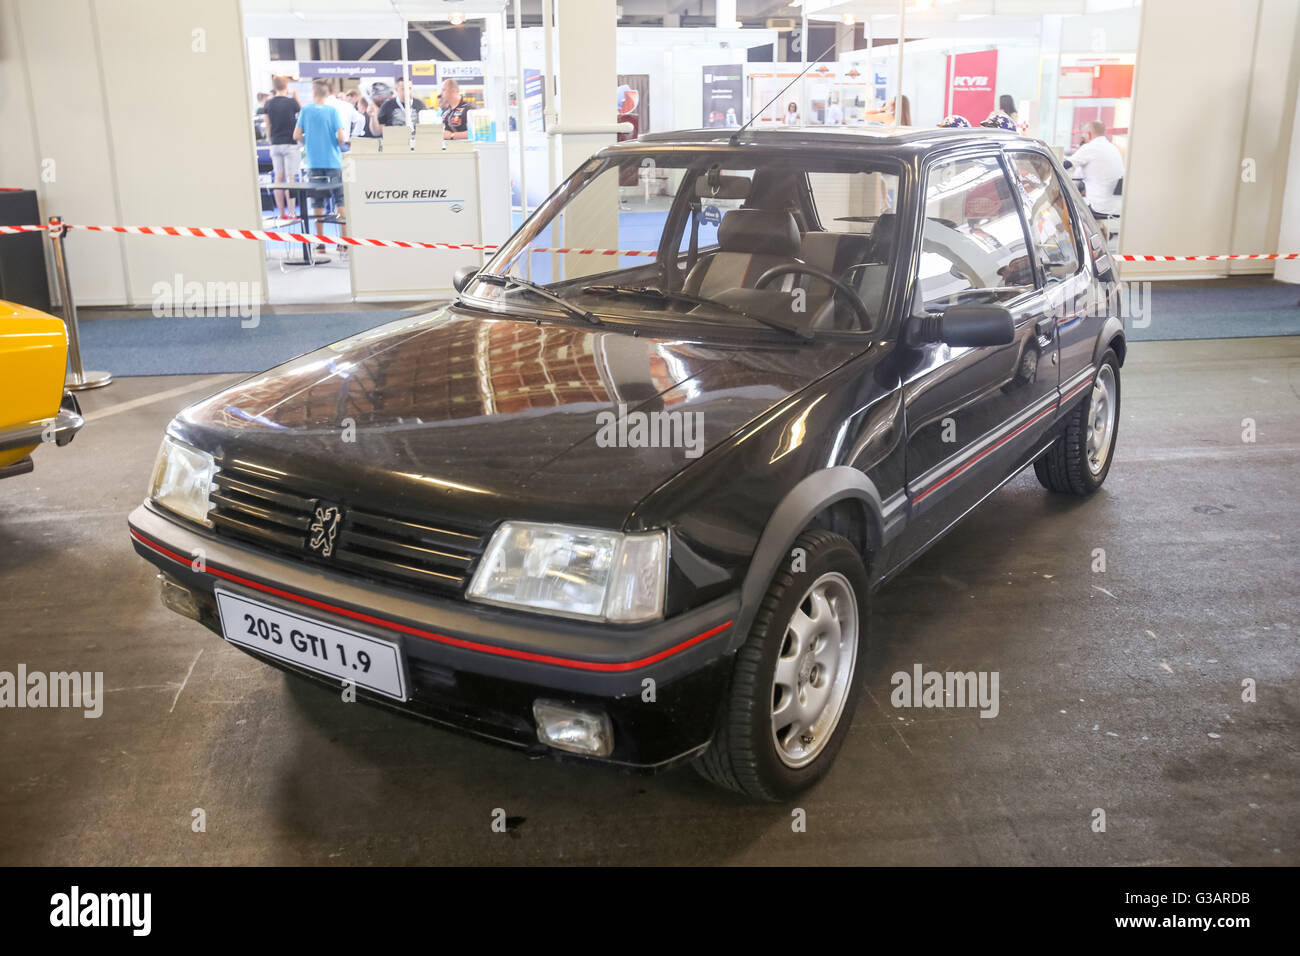 A Peugeot 205 GTI 1.9 oldtimer automobile exhibited at Fast and furious  street race in Zagreb, Croatia Stock Photo - Alamy